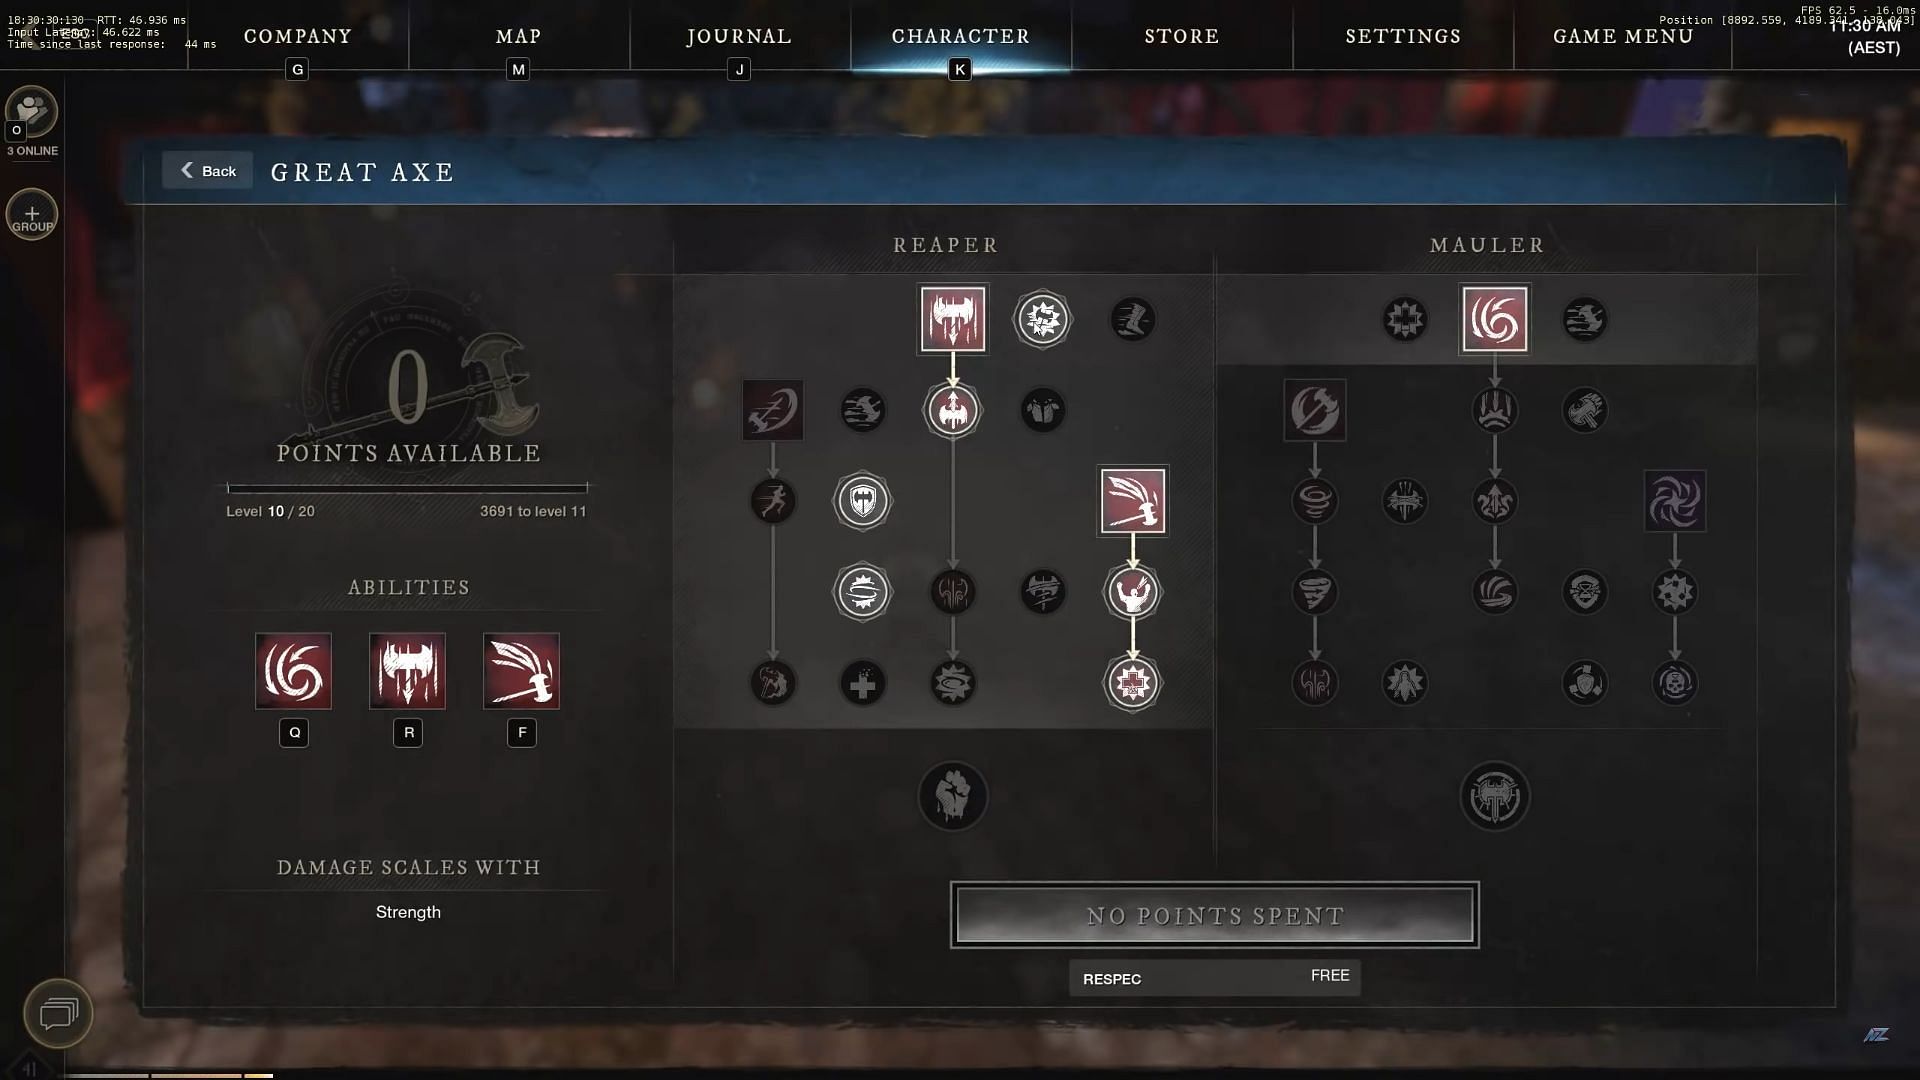 Weapon Mastery for Great Axe (Image via NorZZa)